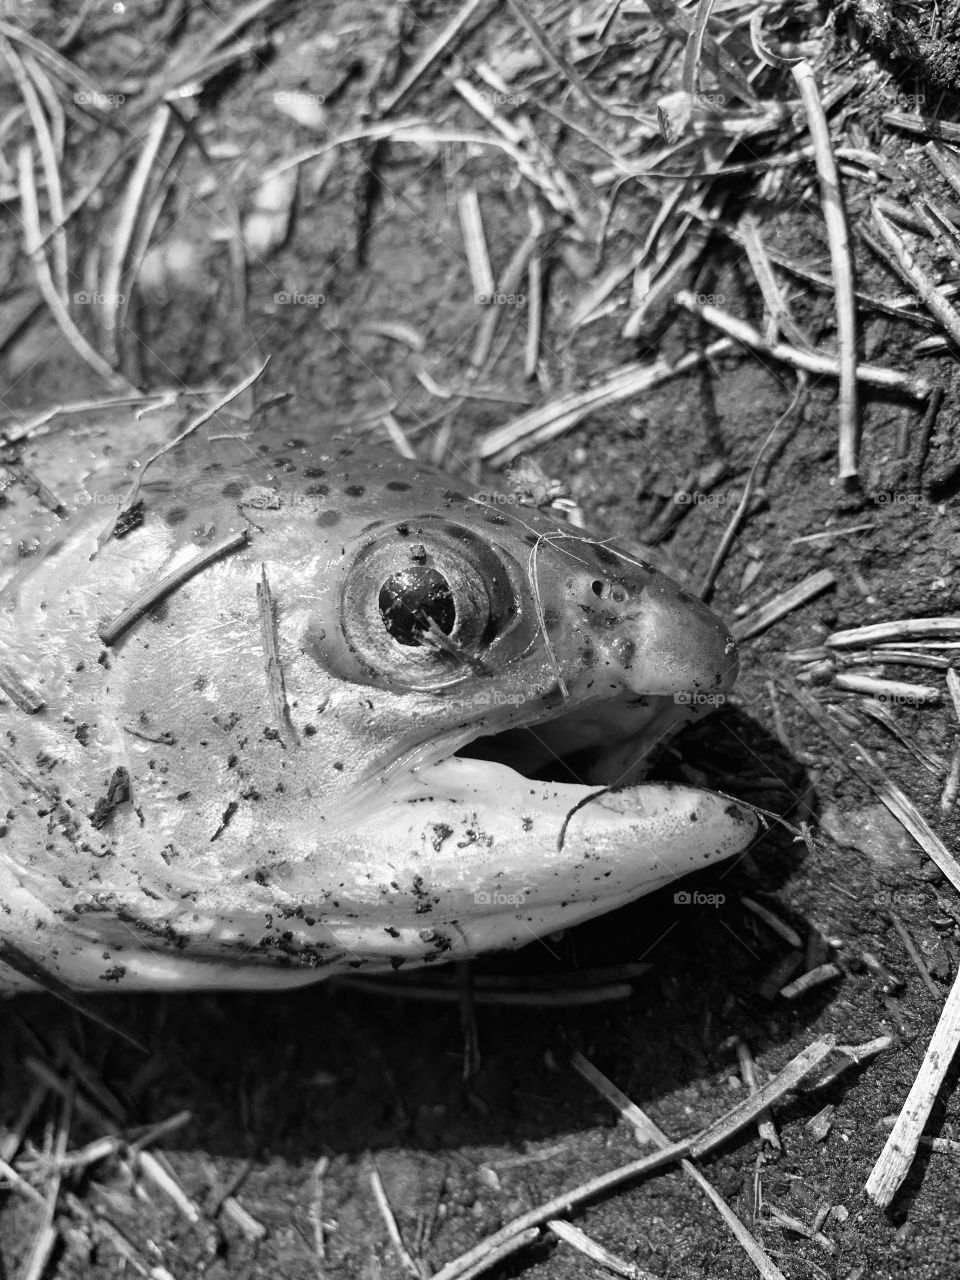 Rainbow trout in black and white 